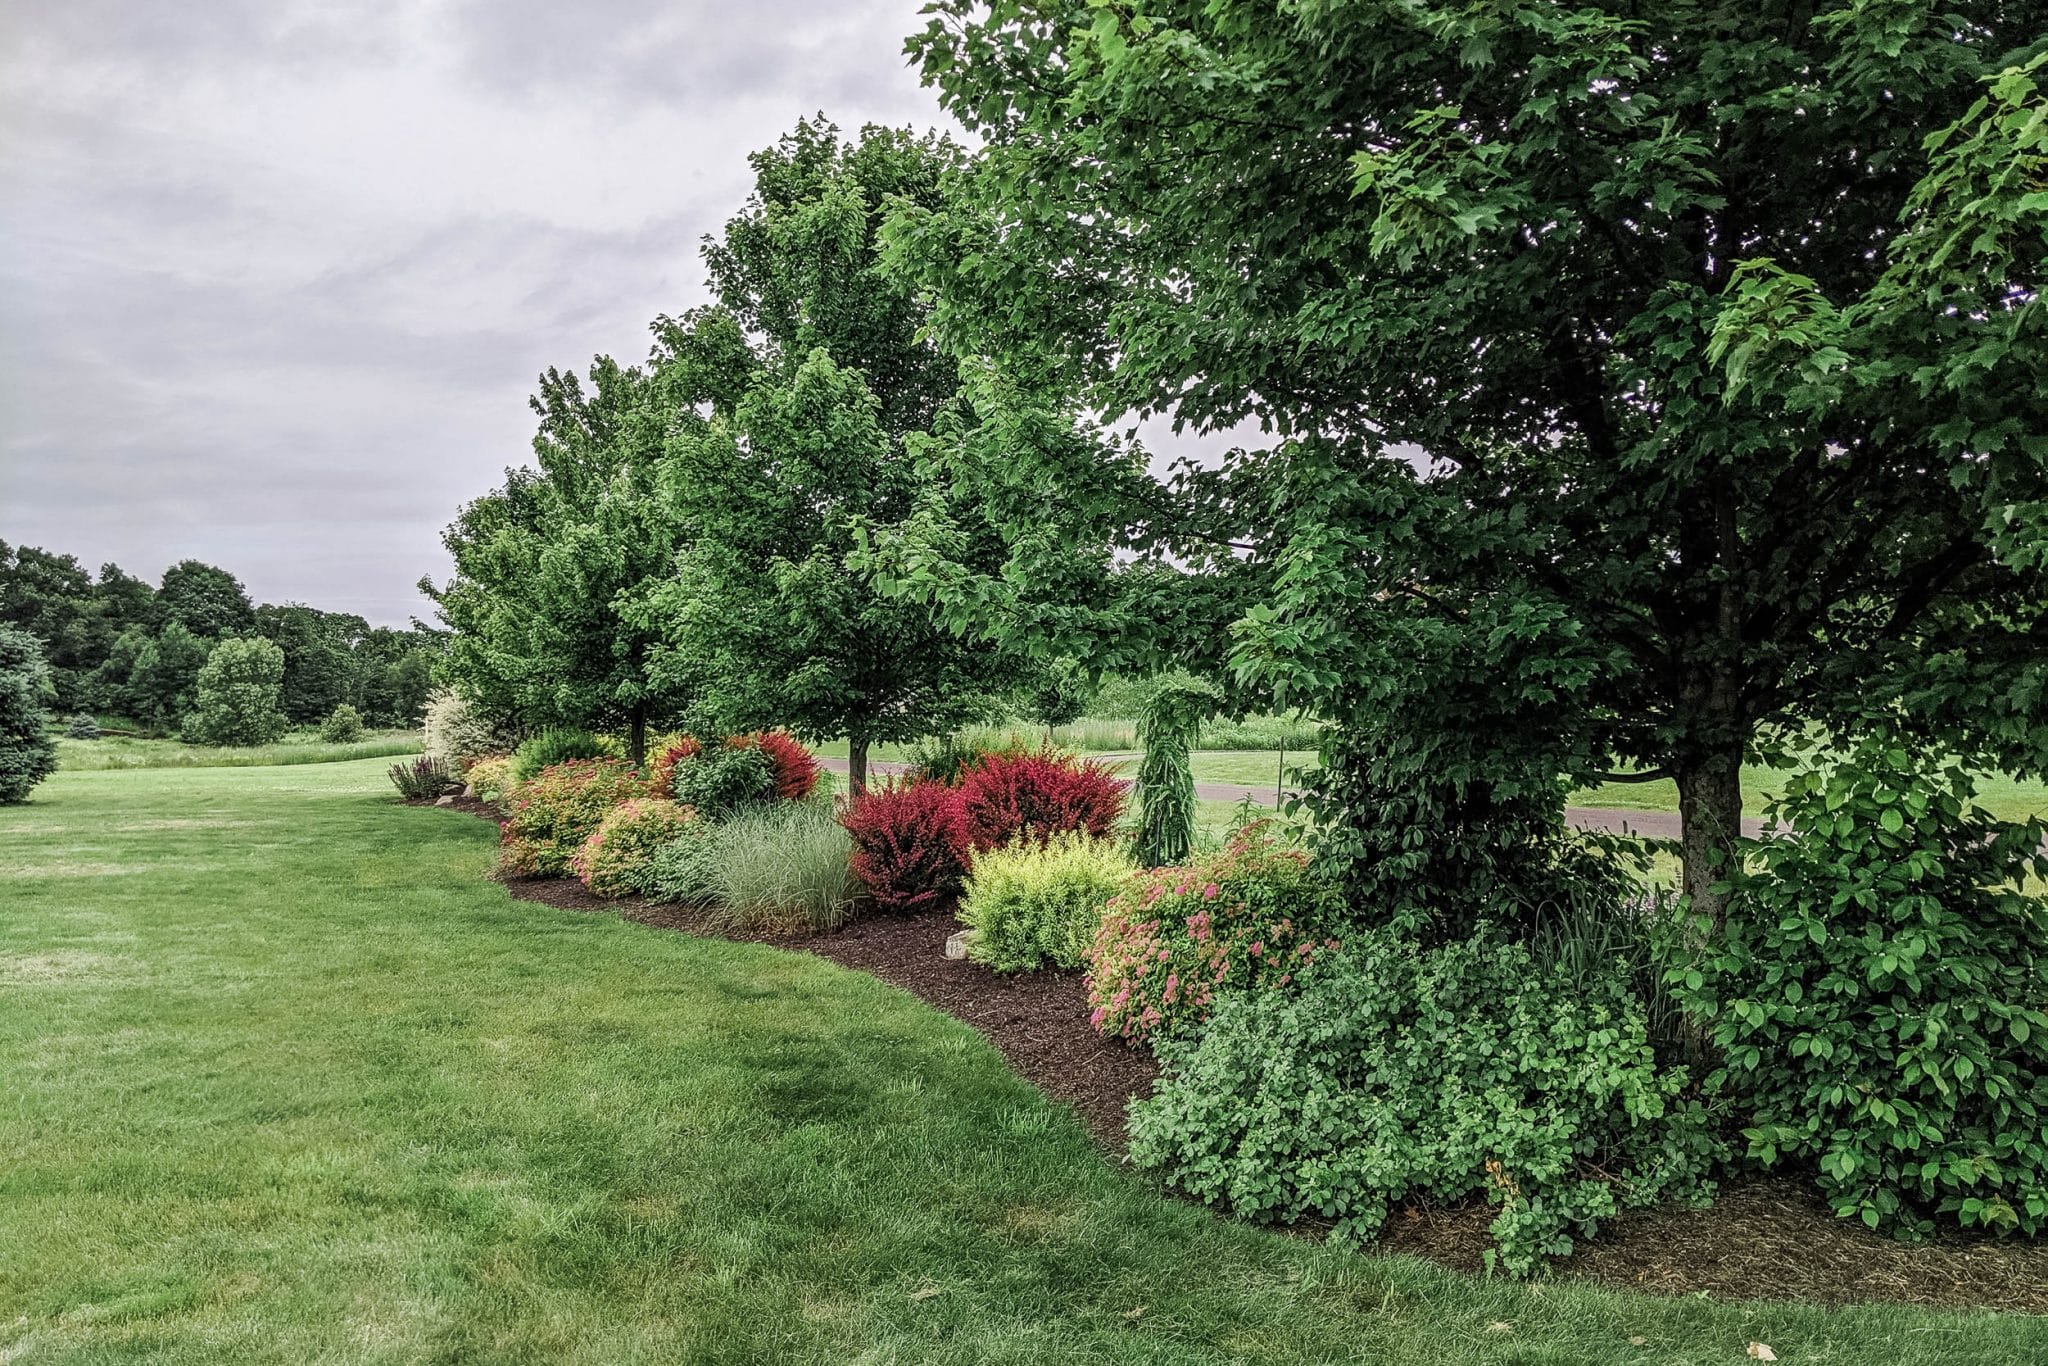 A screening line of native trees, shrubs, perennials, and ornamental grasses blocking the view of the road in Gardiner, NY, designed by Masseo Landscape, Inc. and plants provided by Kalleco Nursery Corp.